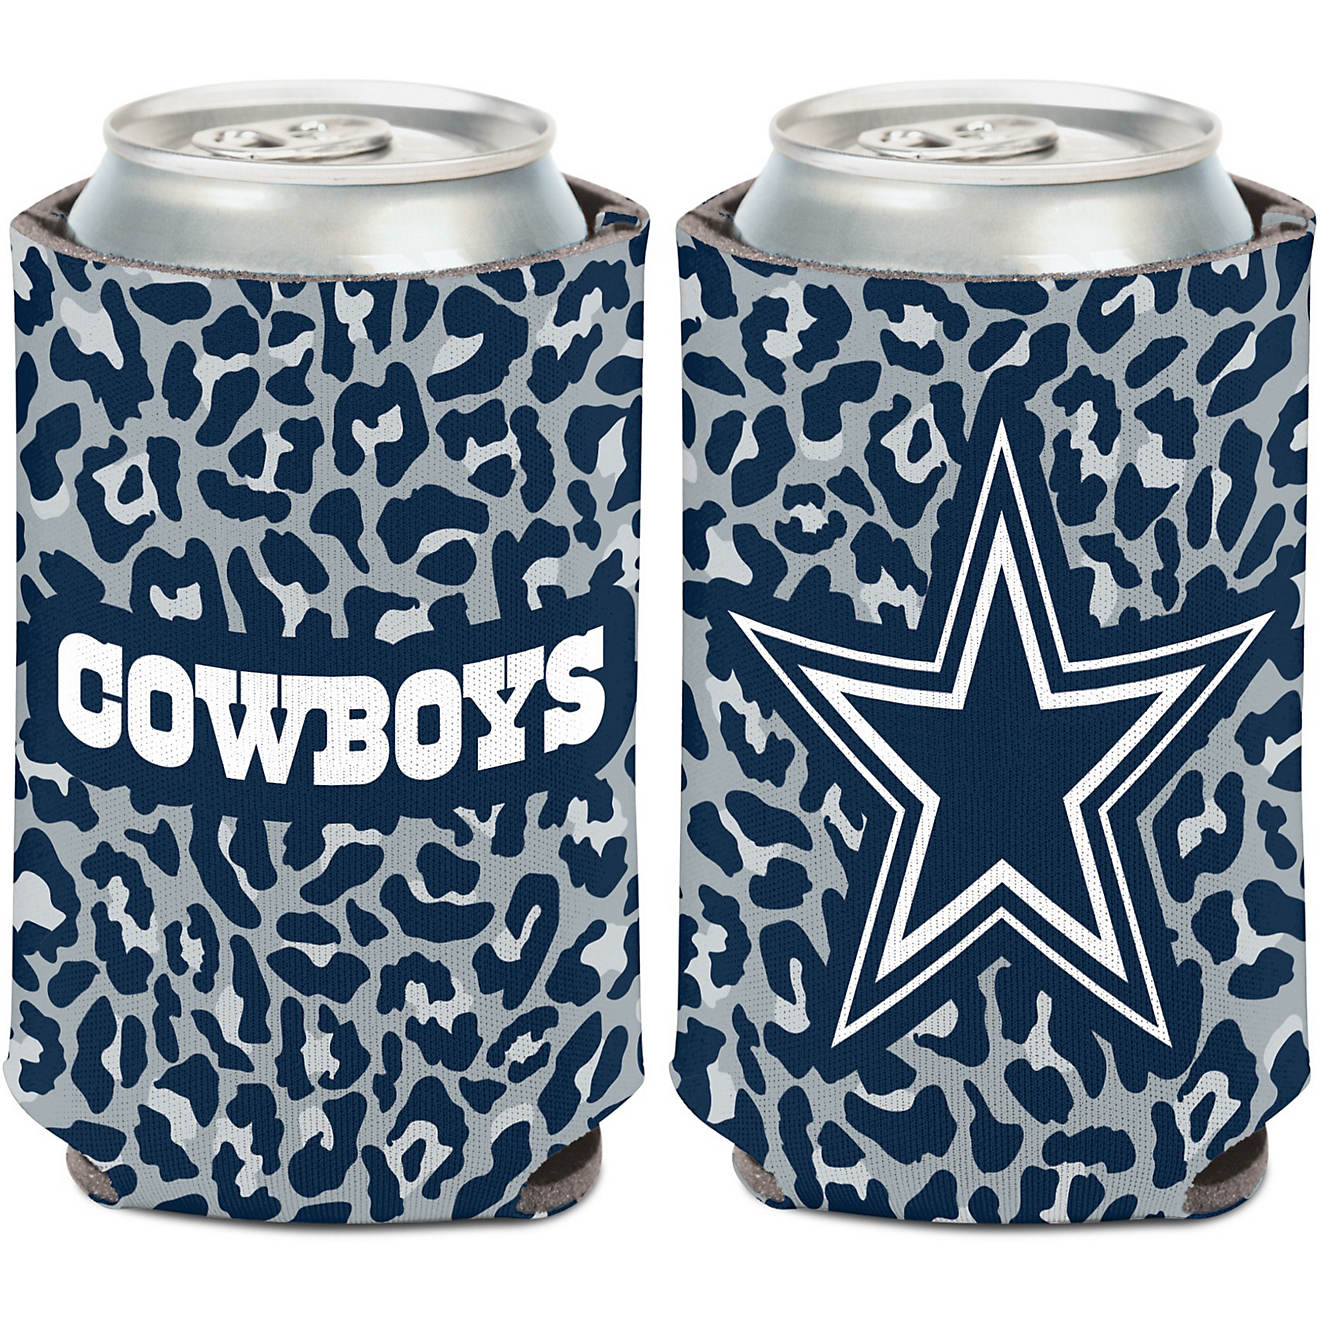 Rawlings Dallas Cowboys 30 Can Welded Cooler